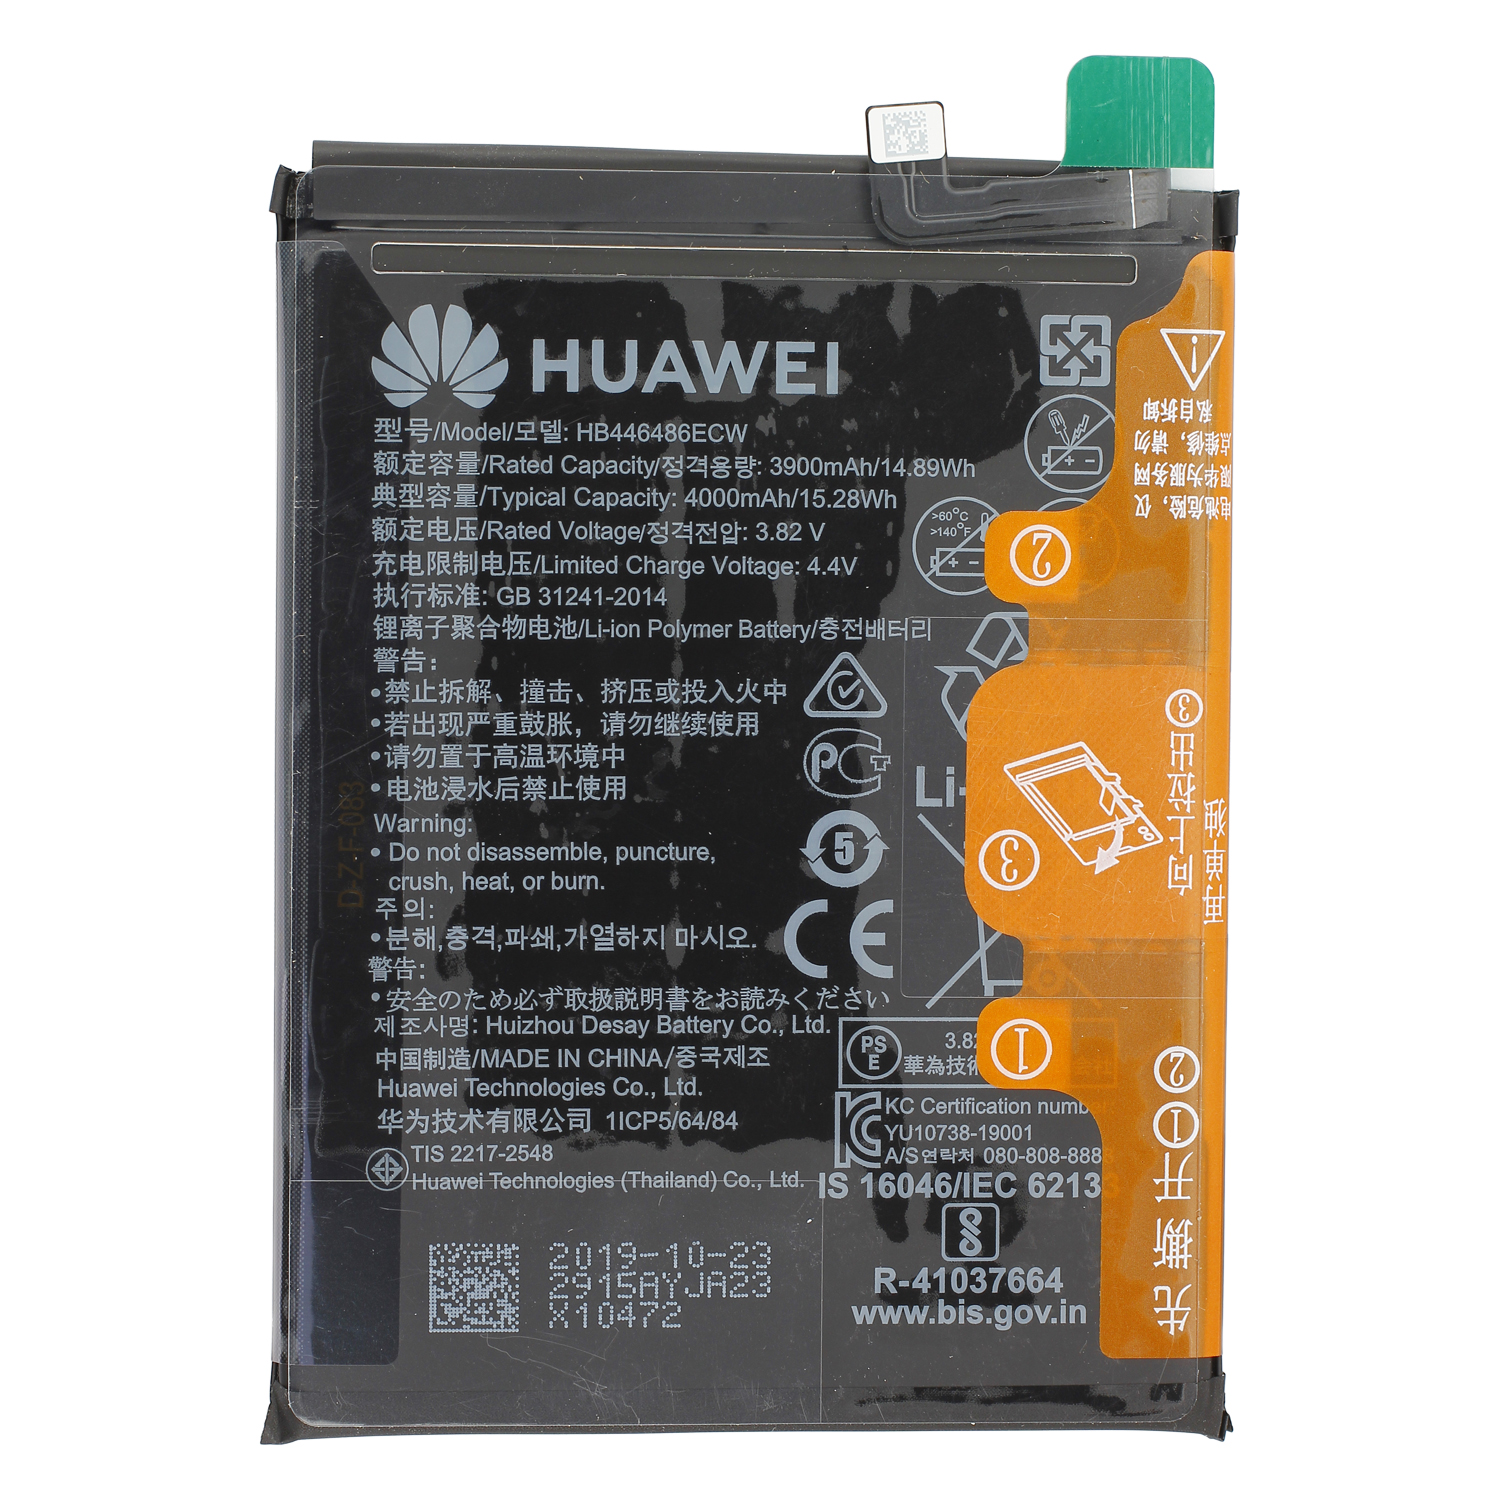 Huawei Battery HB446486ECW for P20 Lite (2019 / P Smart Pro / P Smart Z / Honor 9X